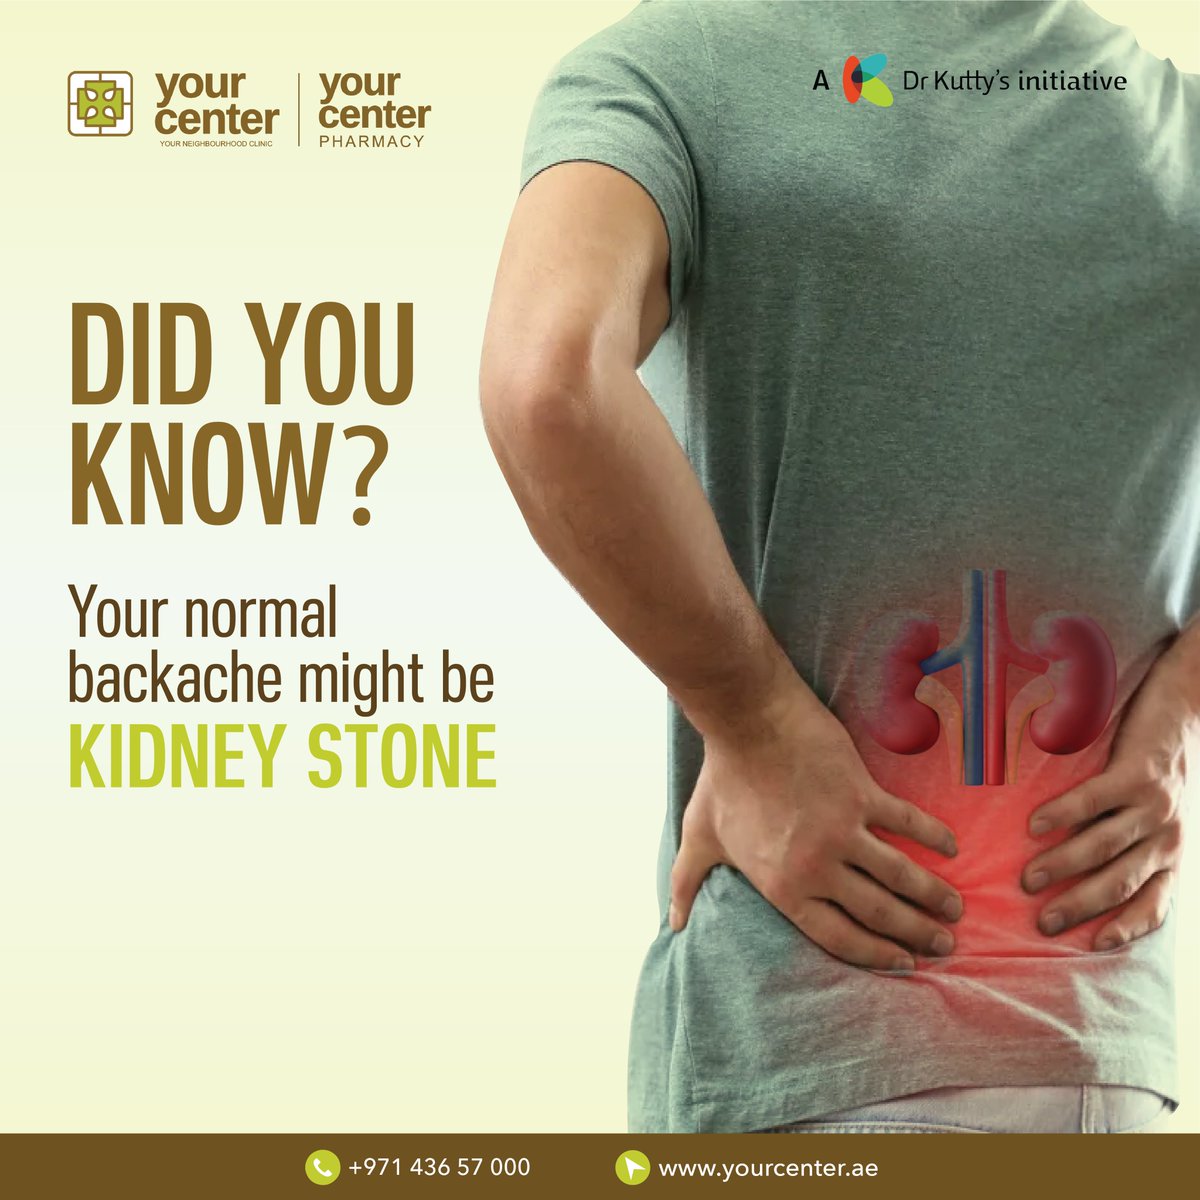 Suffering from back pain? Don't let it hold you back! Consult our expert doctor today for personalized care and relief.
Contact us for any query.
📷 +971 43657000
#backpainrelief #kidneystone #healthylivingdubai #kidneycaredubai #impzdubai #dubaiproductioncity